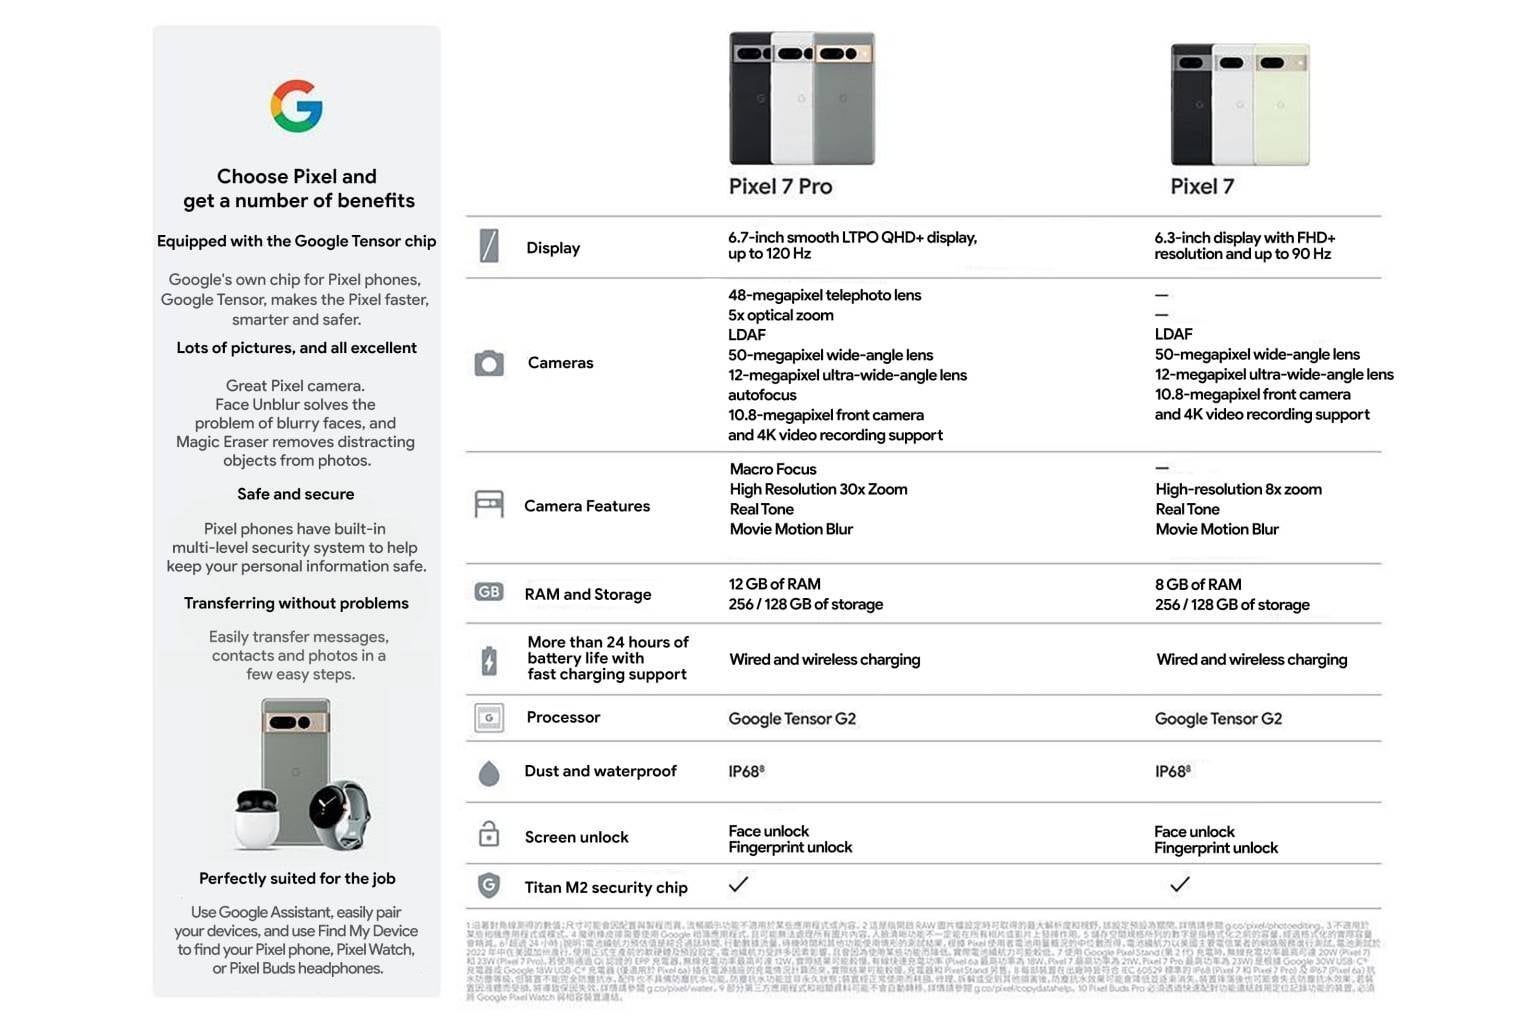 Alleged Pixel 7 and 7 Pro spec sheet - New Pixel 7 duo features like greater zoom range & movie blur mentioned in spec sheet